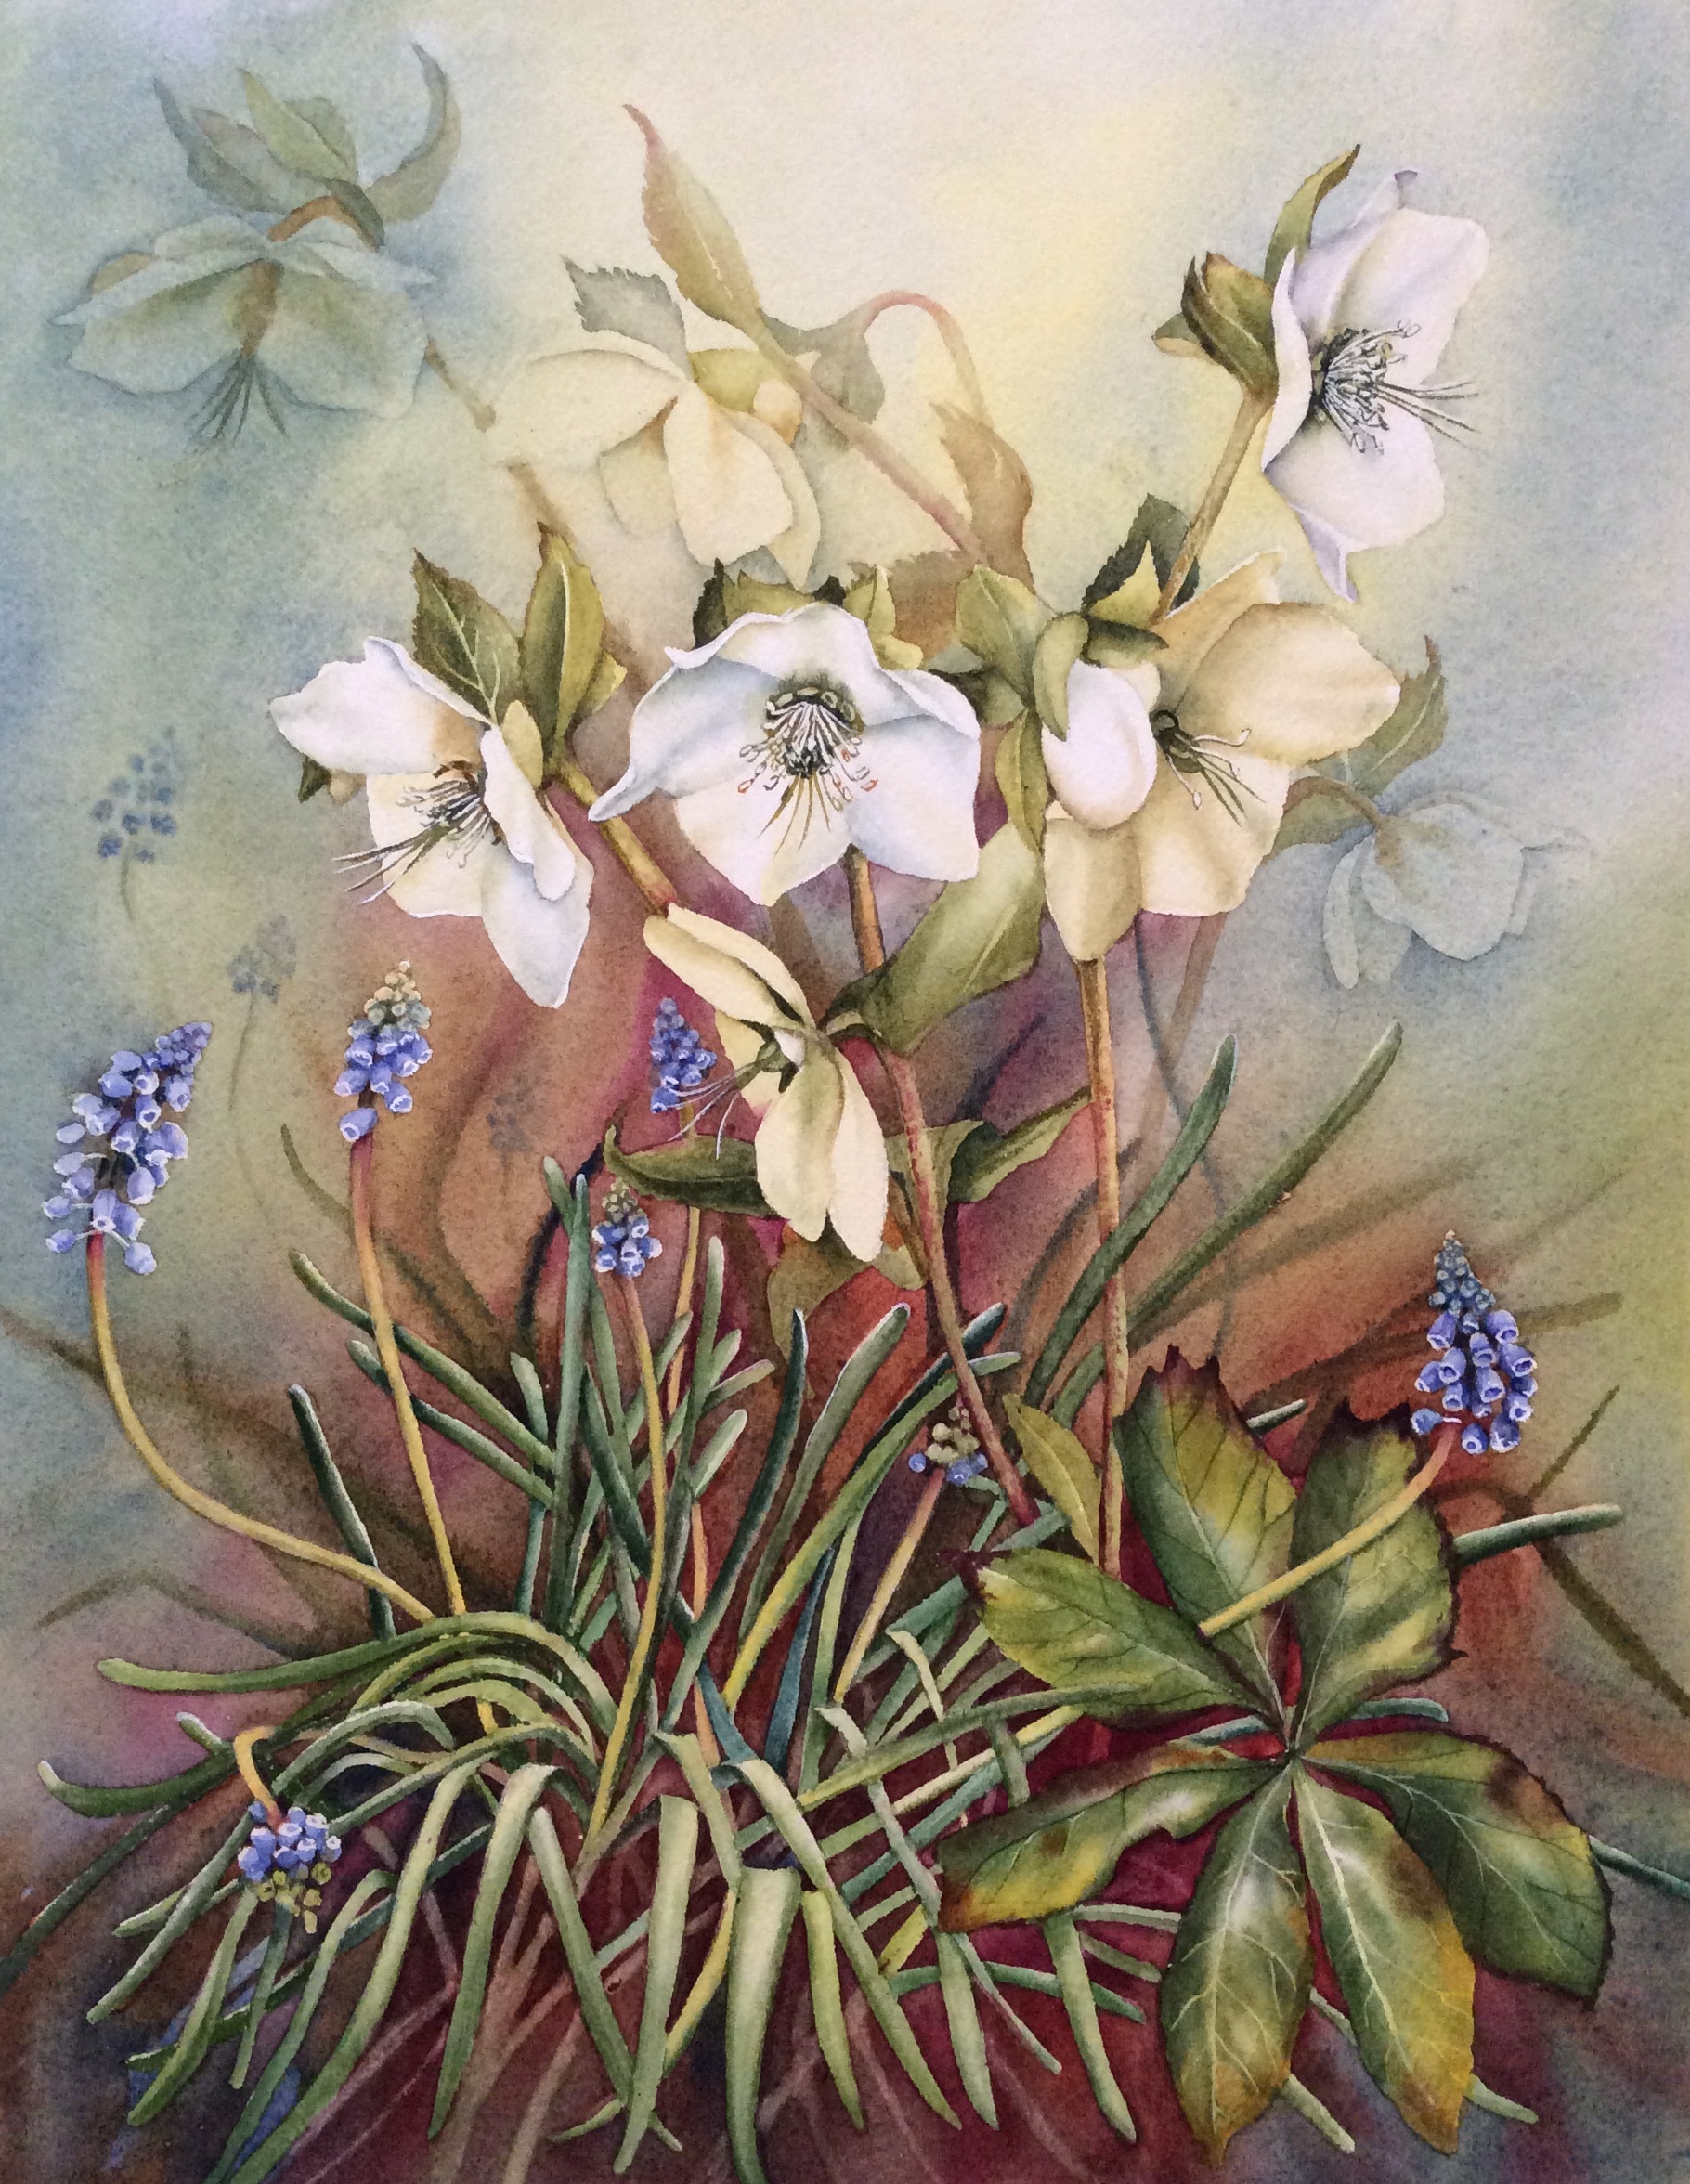 Hellebores and Muscari